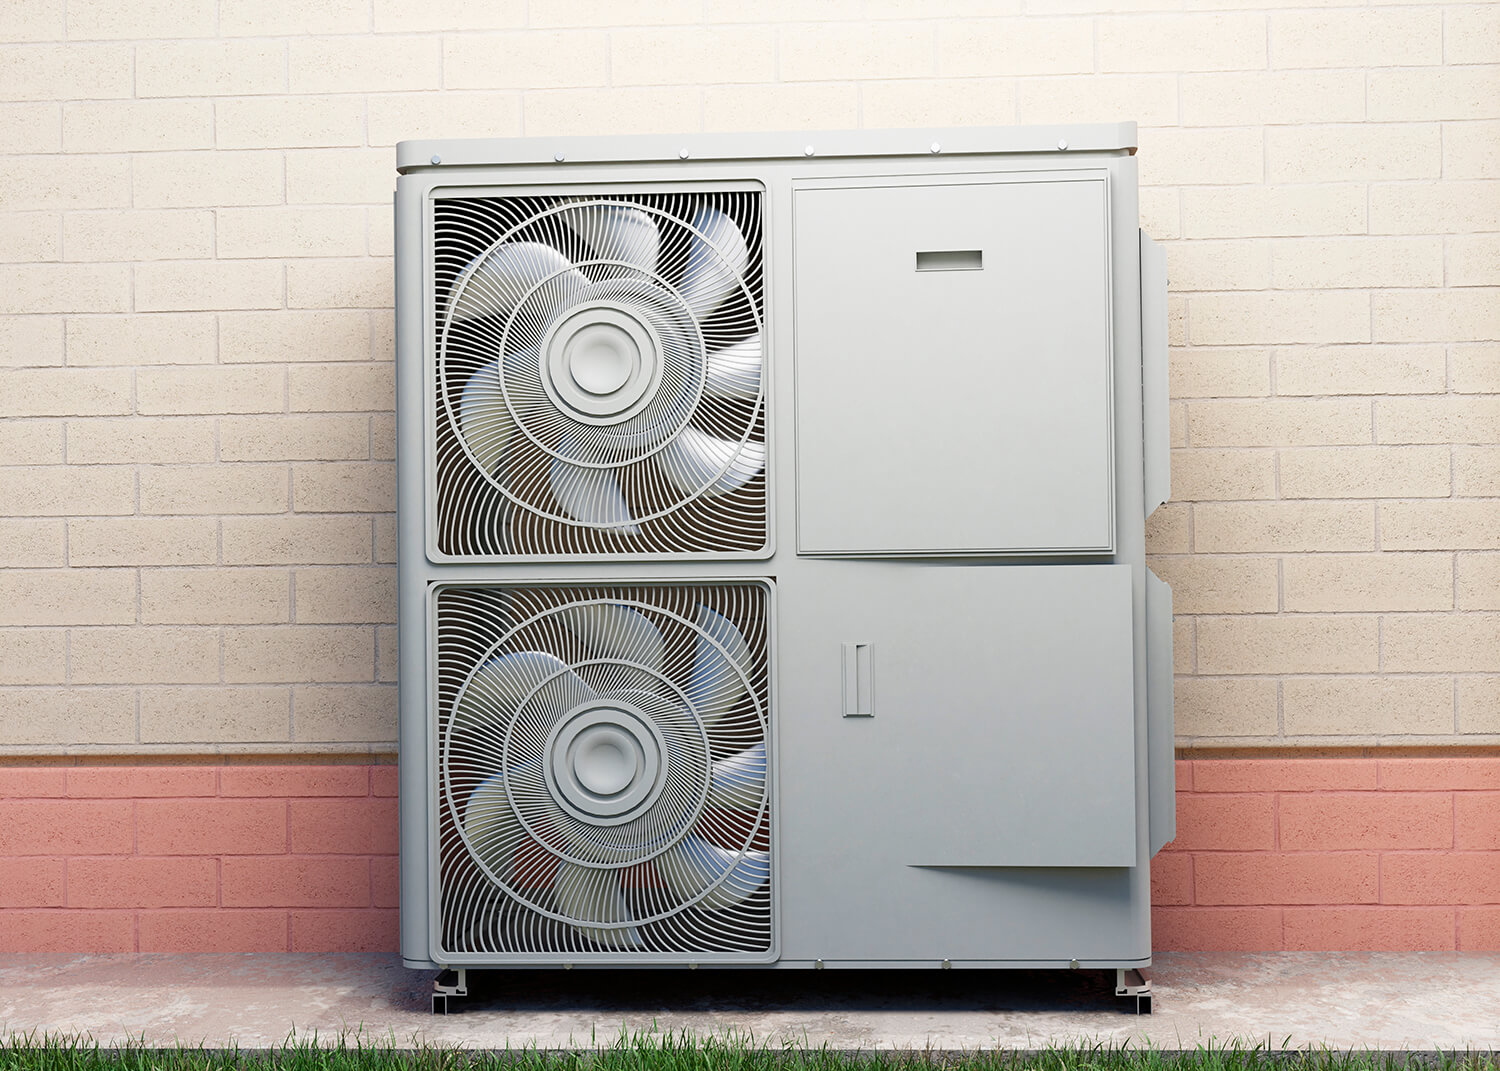 We are looking for air conditioner repair in Jacksonville FL